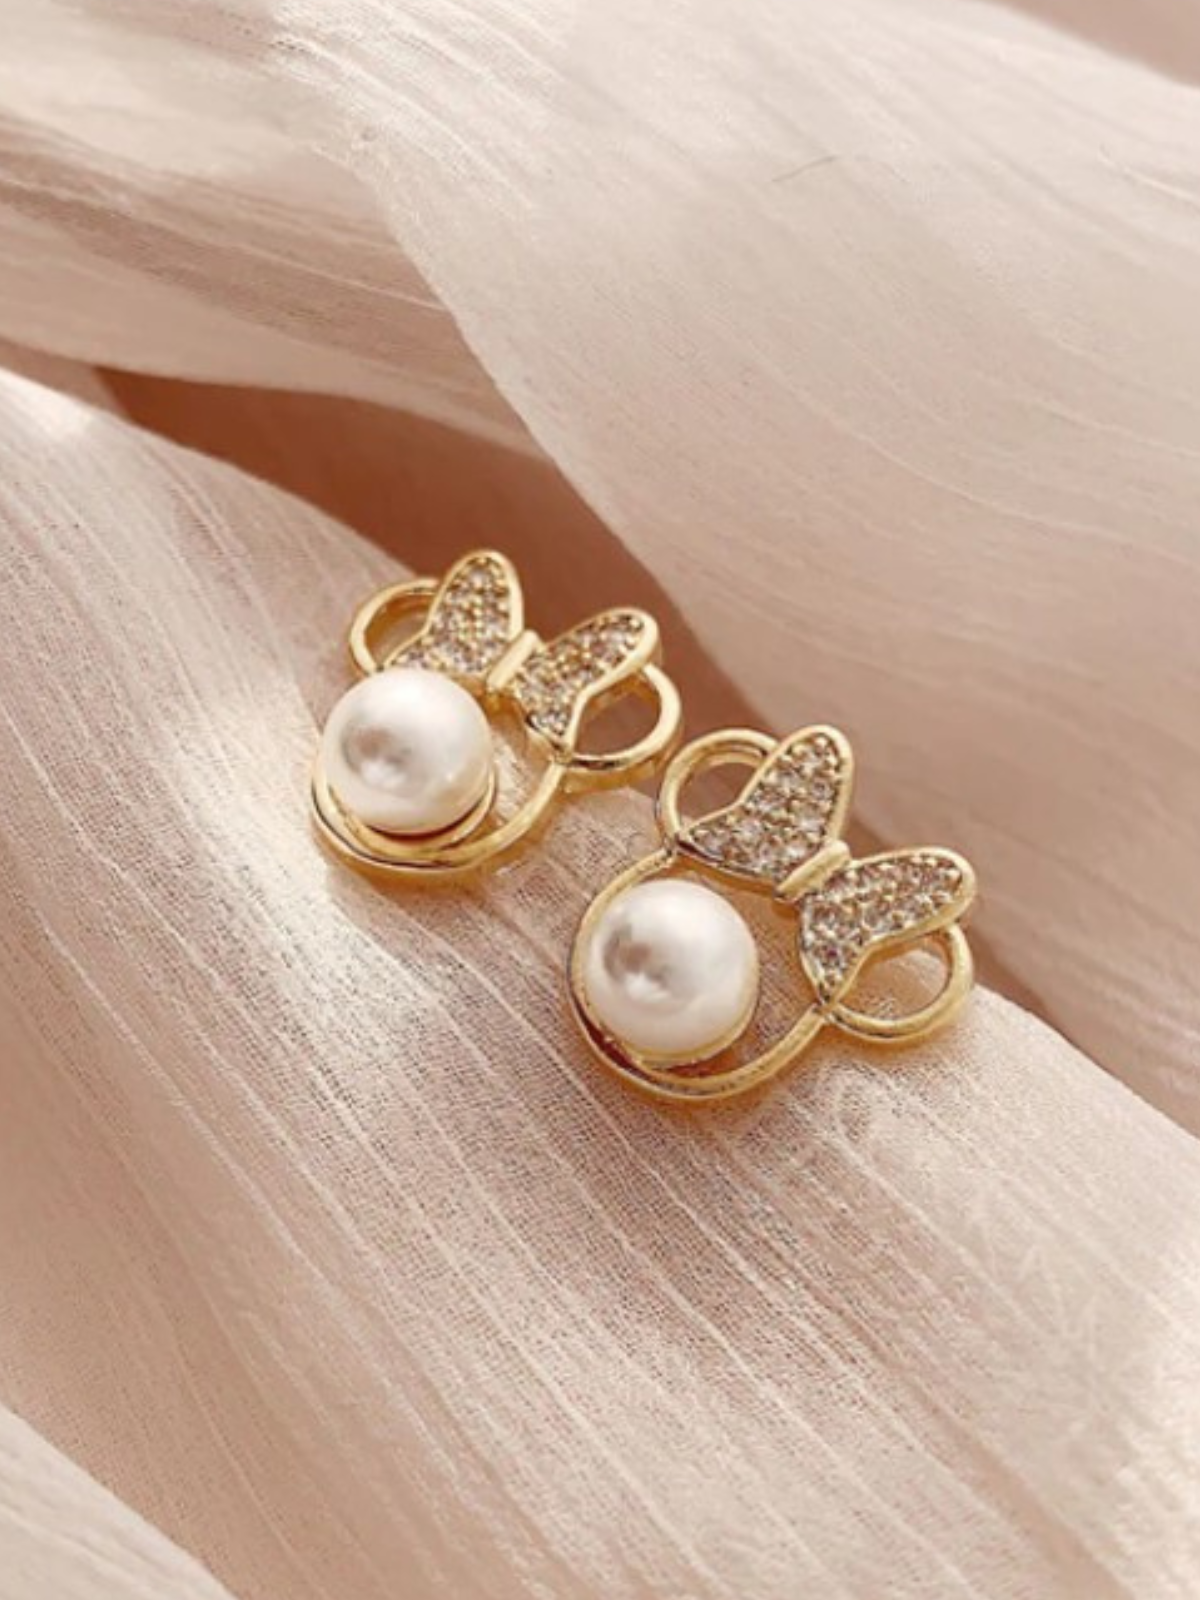 Mia Belle Girls Pearl And Bow Stud Earrings | Girls Accessories